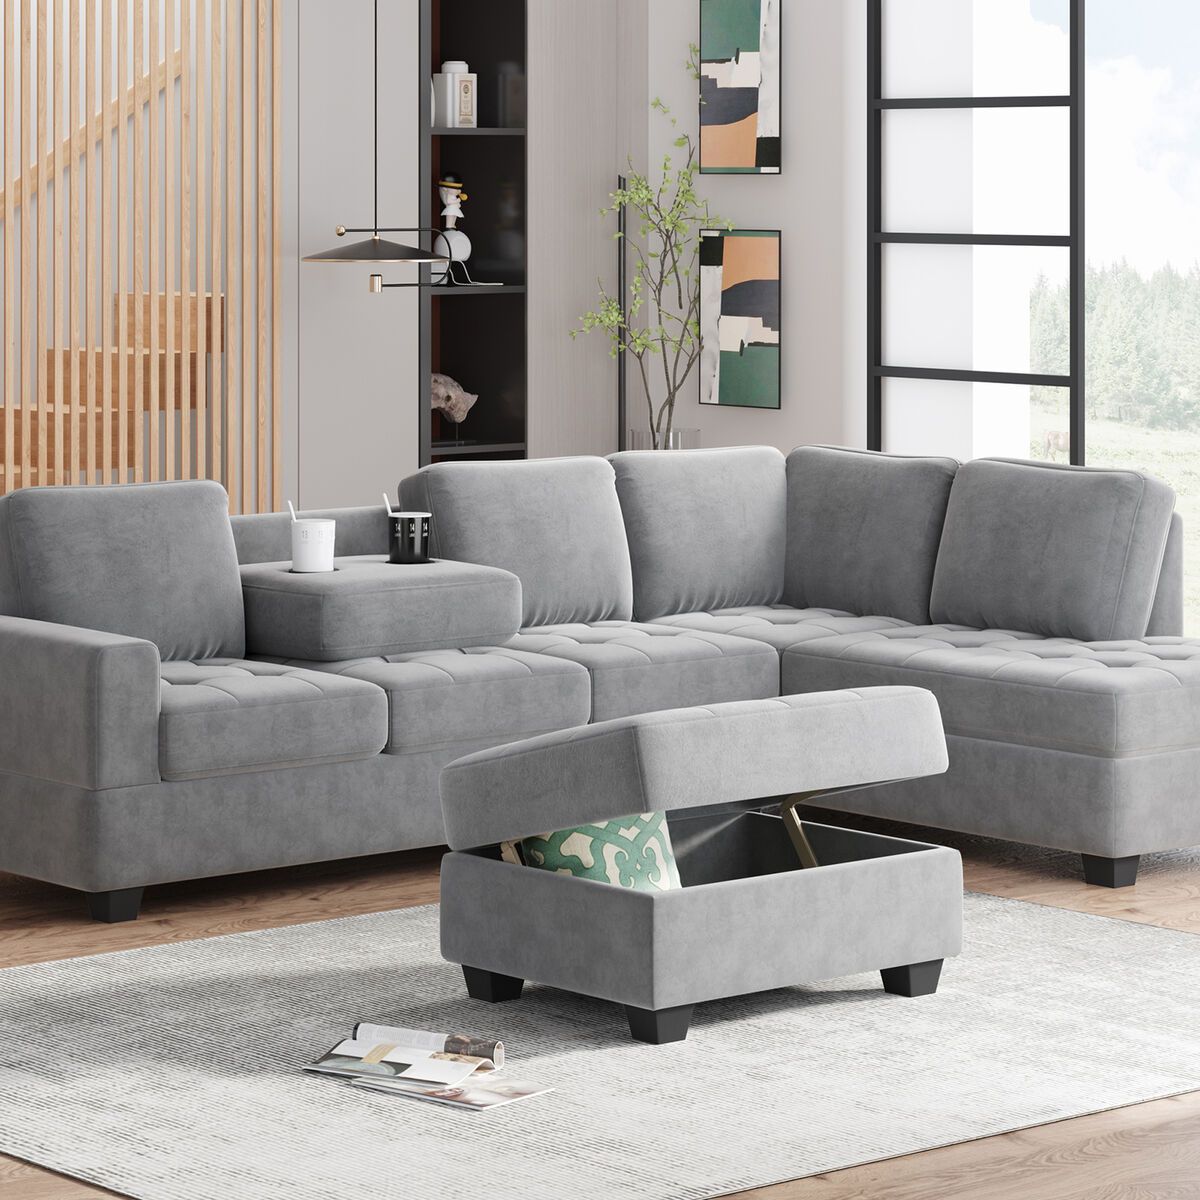 6 Seater L Shaped Sectional Sofa Couch W/ Reversible Chaise Storage  Ottomans Set | Ebay With Regard To 6 Seater Sectional Couches (View 6 of 15)